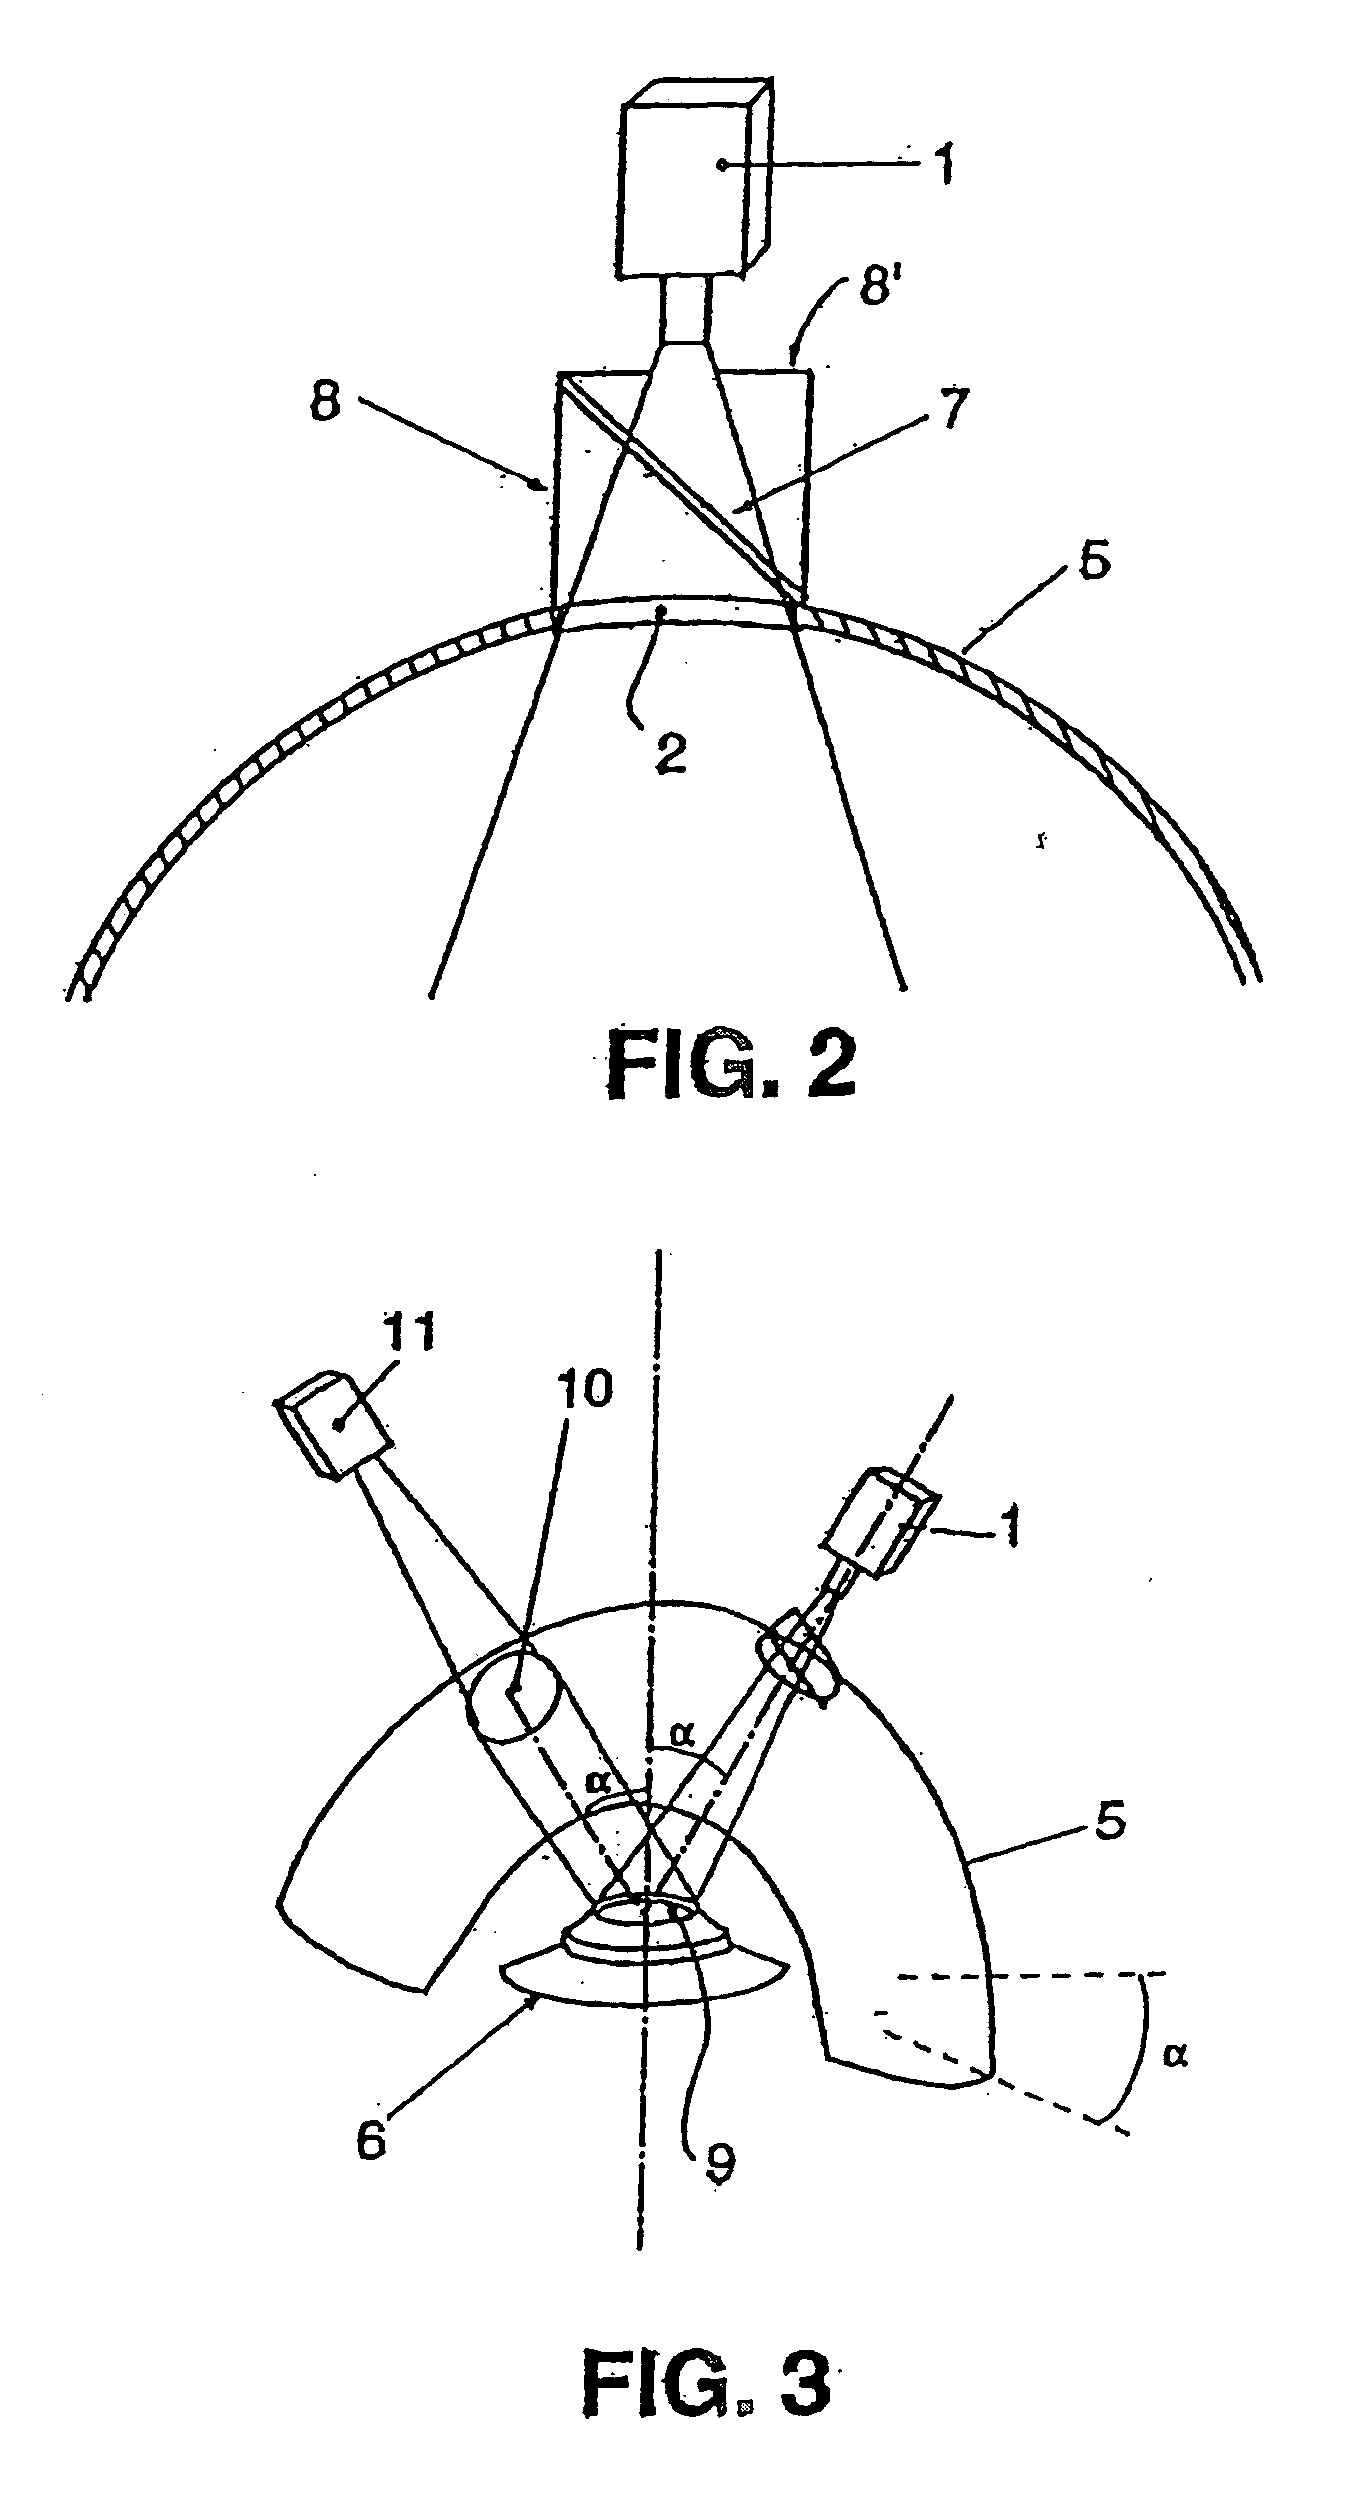 Device and method for optical control under diffuse illumination and observation means of crockery items or any glazed ceramic products